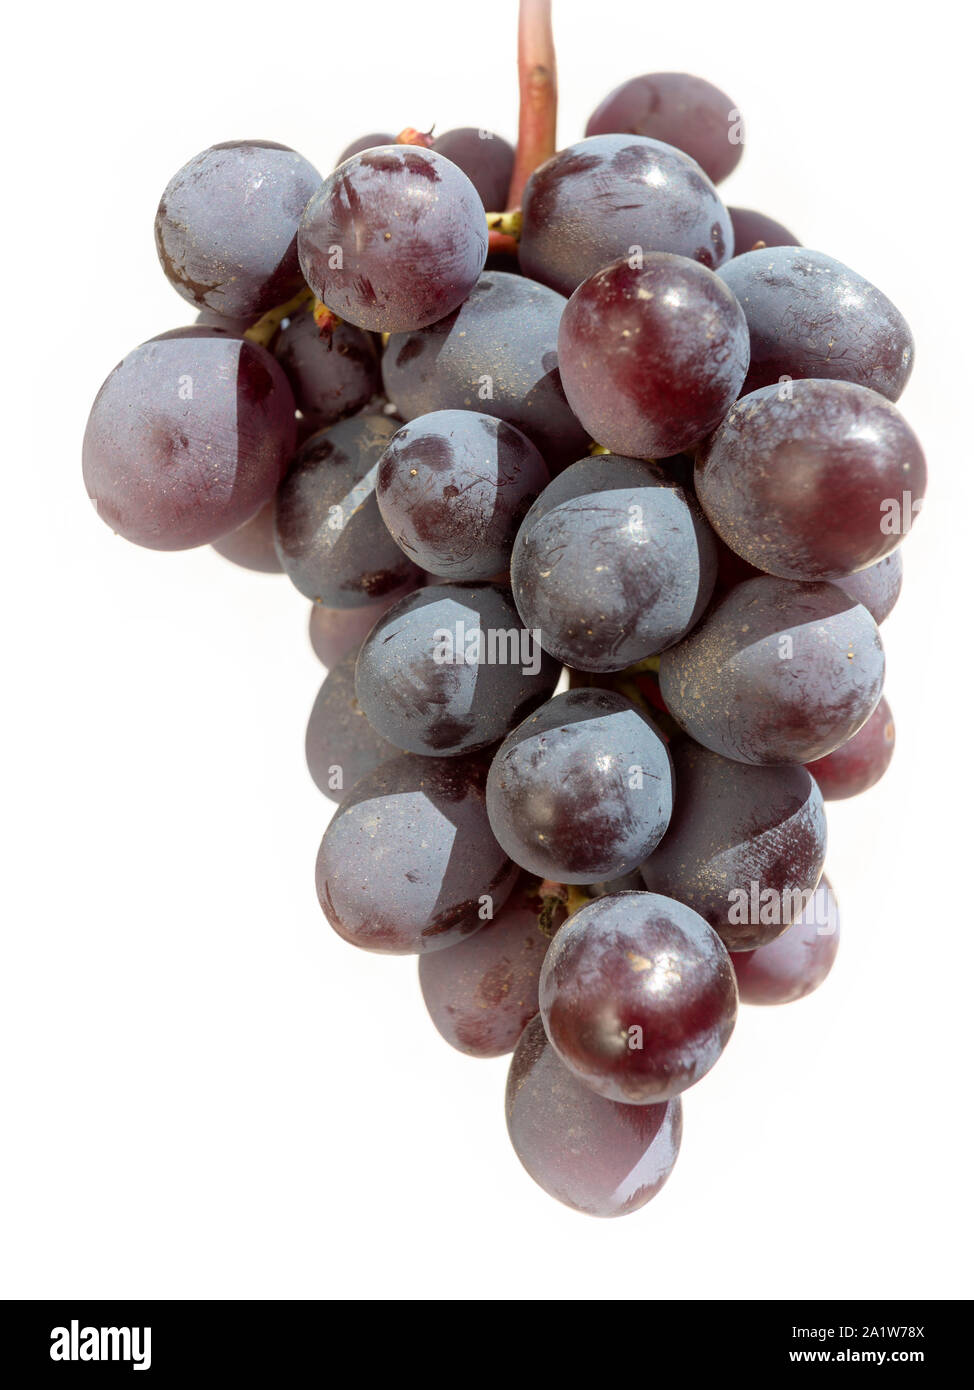 A freshly picked bunch of black Cretan grapes against a white background. Stock Photo